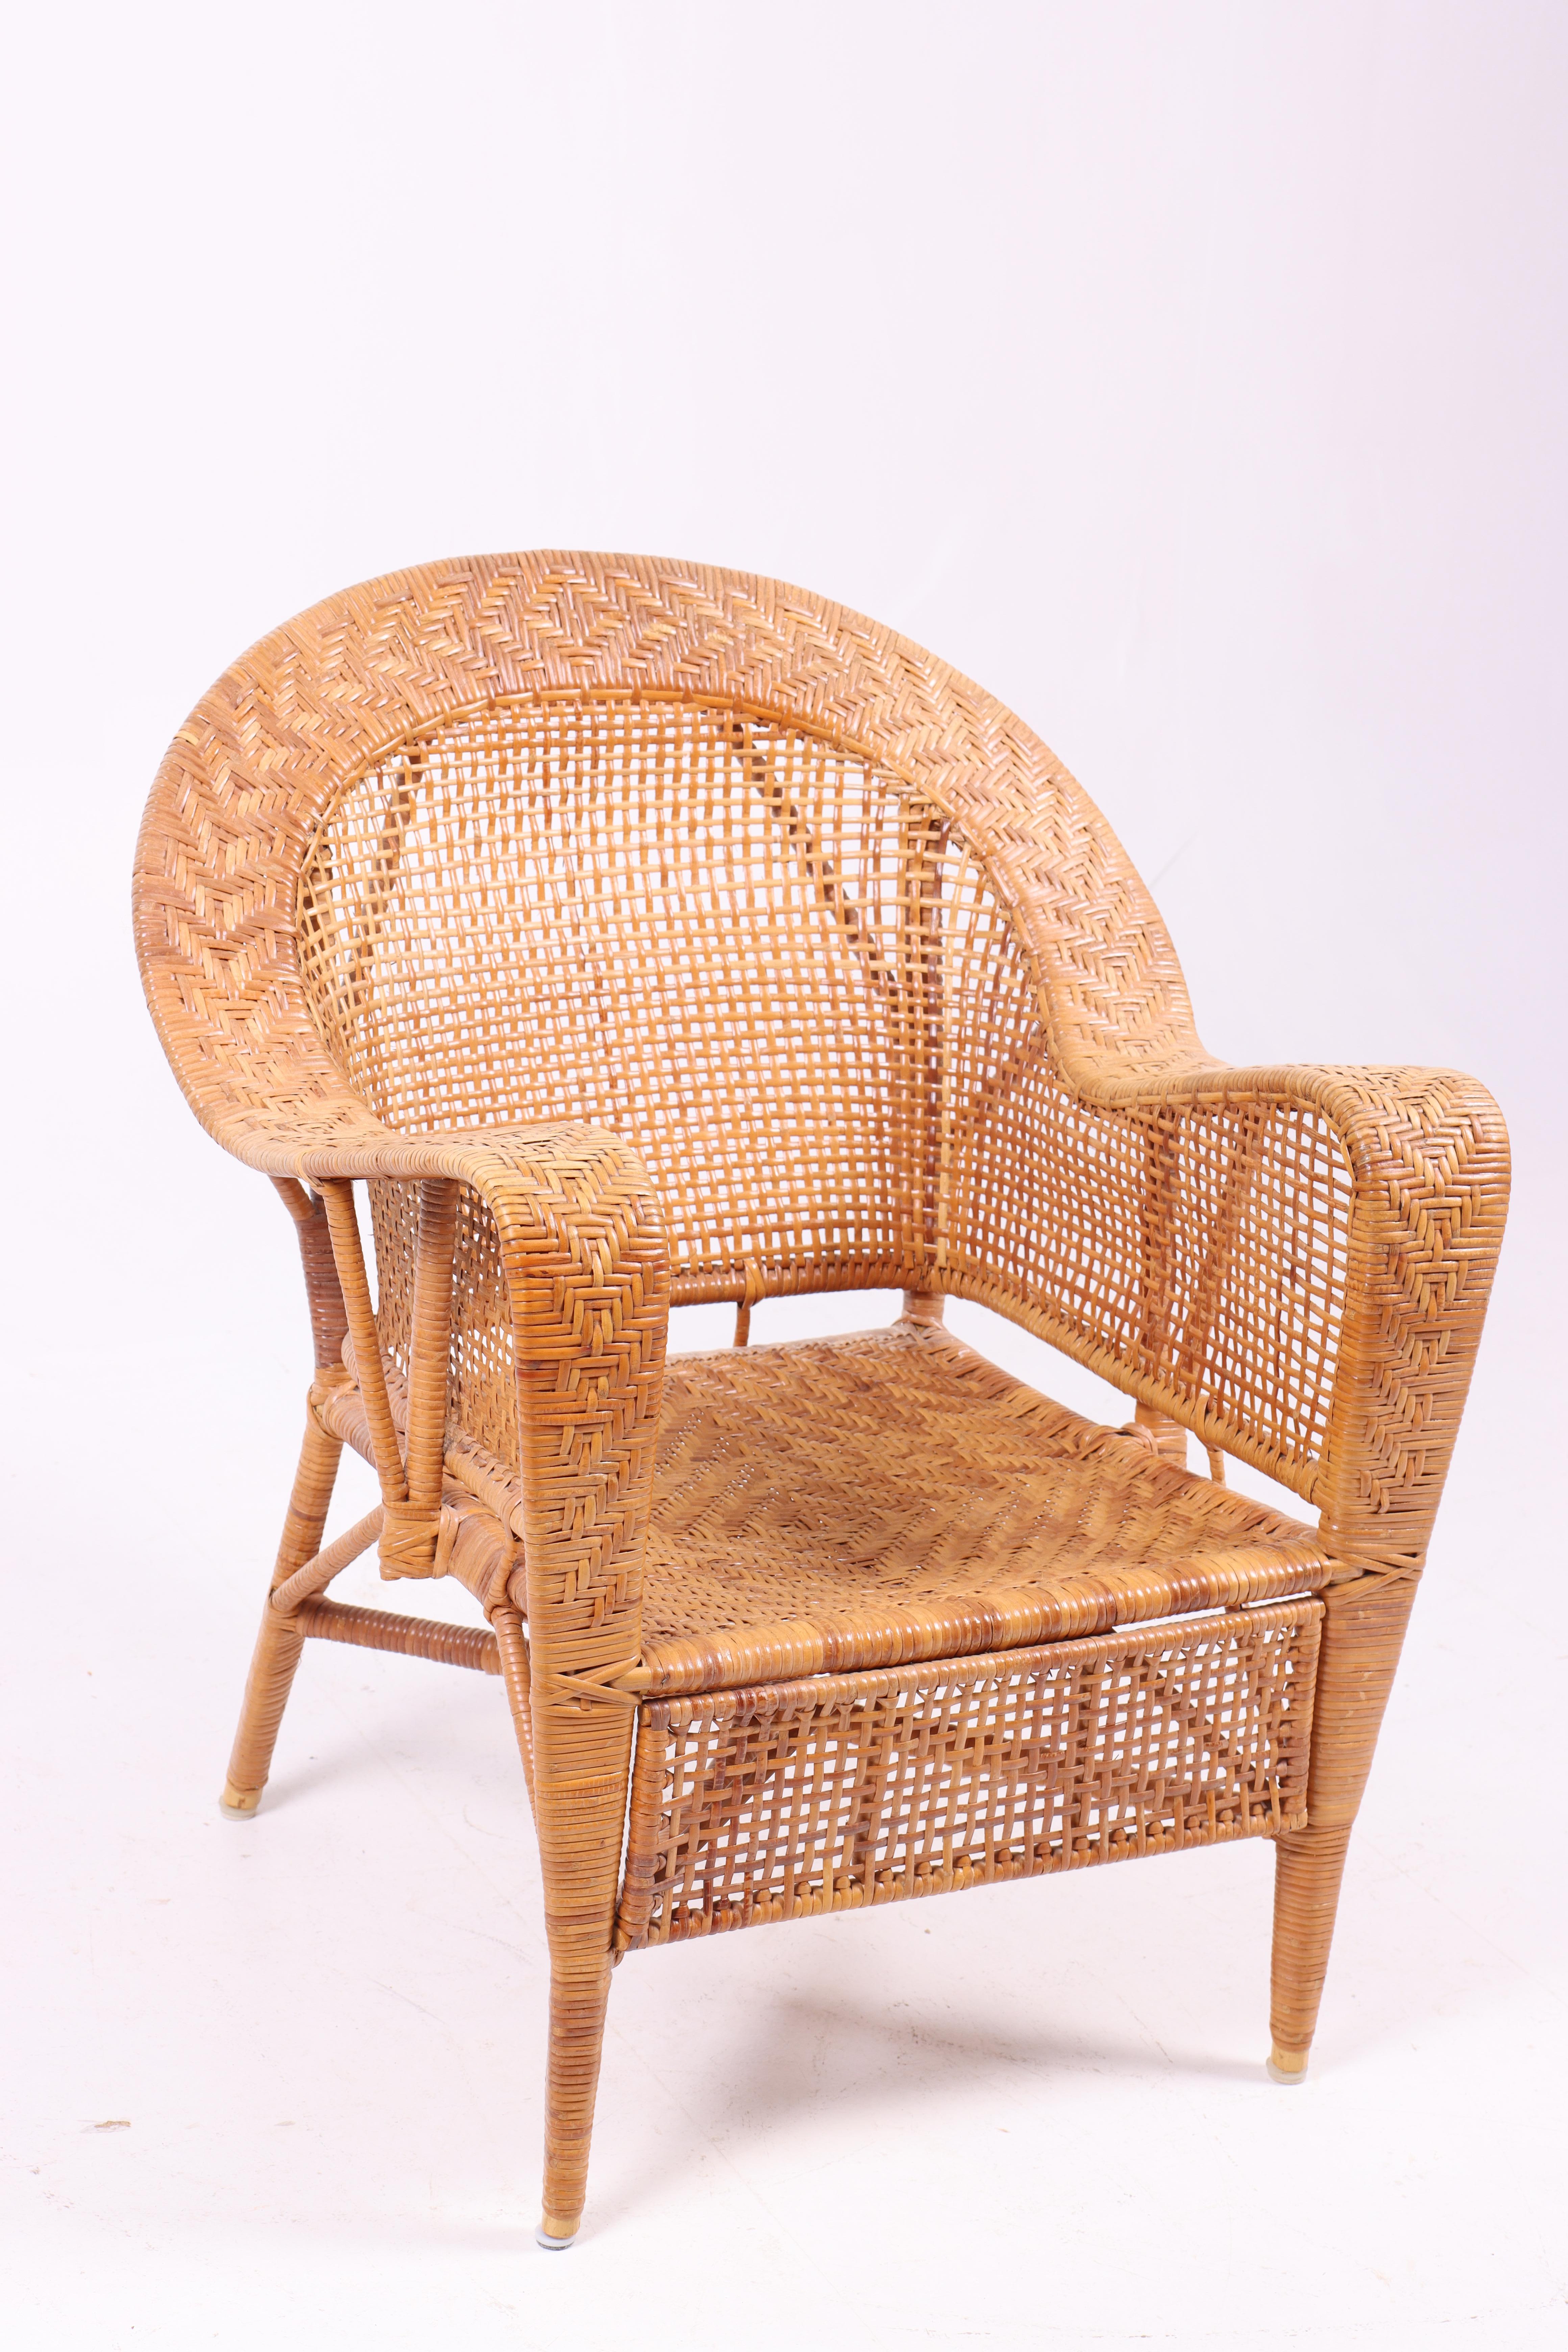 Scandinavian Modern Pair of Rattan Lounge Chairs by Kay Fisker, 1950s For Sale